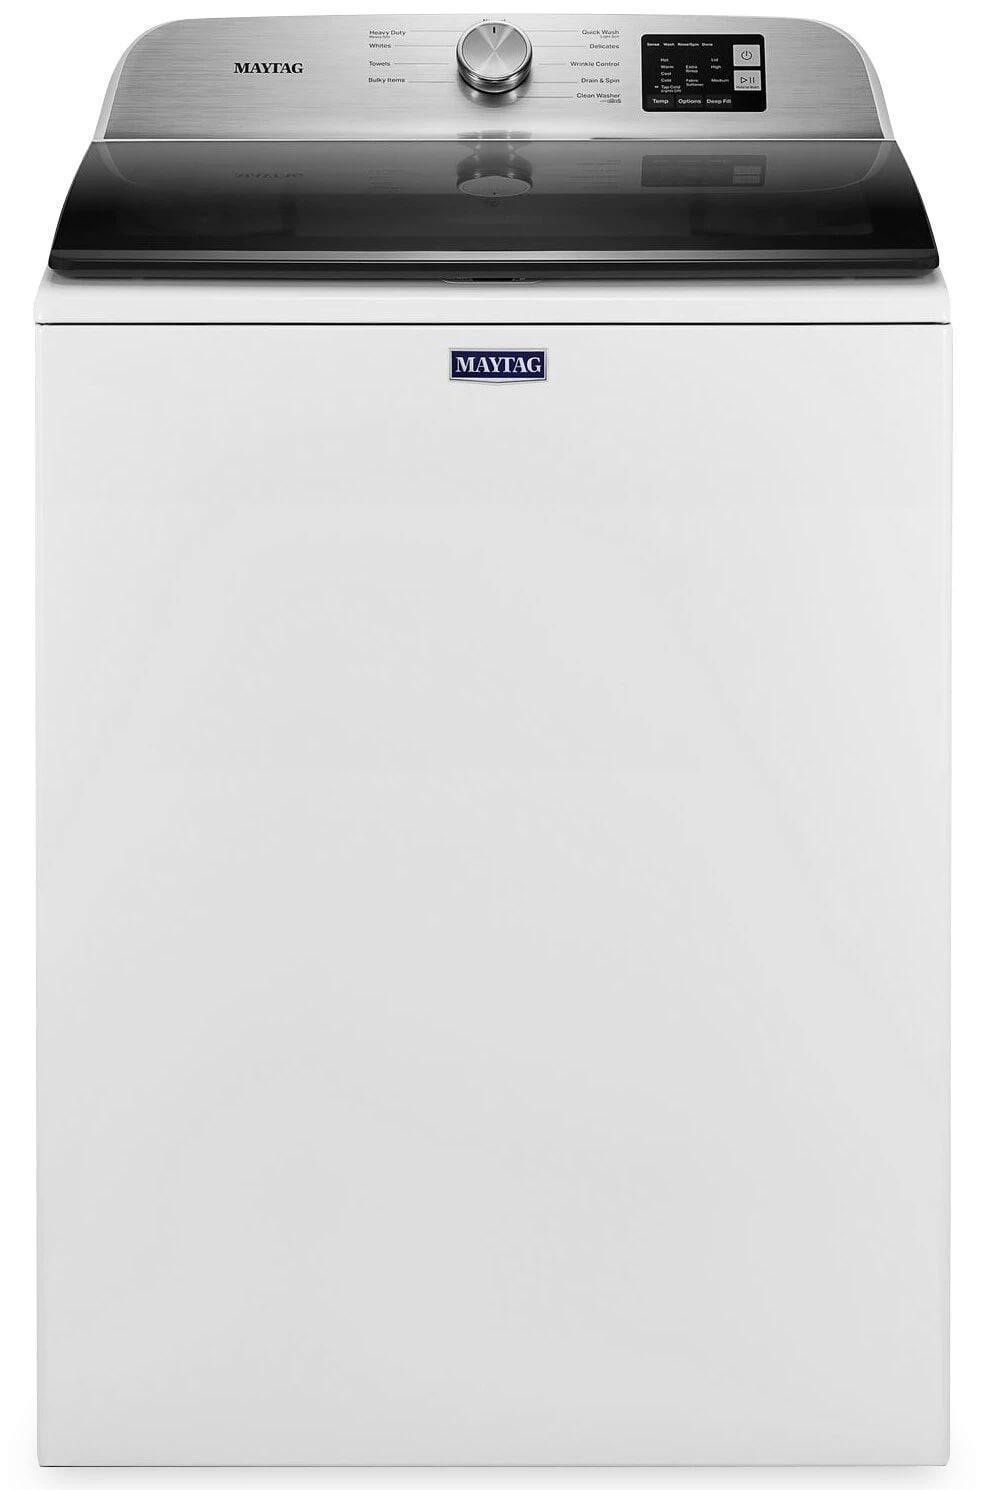 Maytag - 5.5 cu. Ft  Top Load Washer in White - MVW6200KW